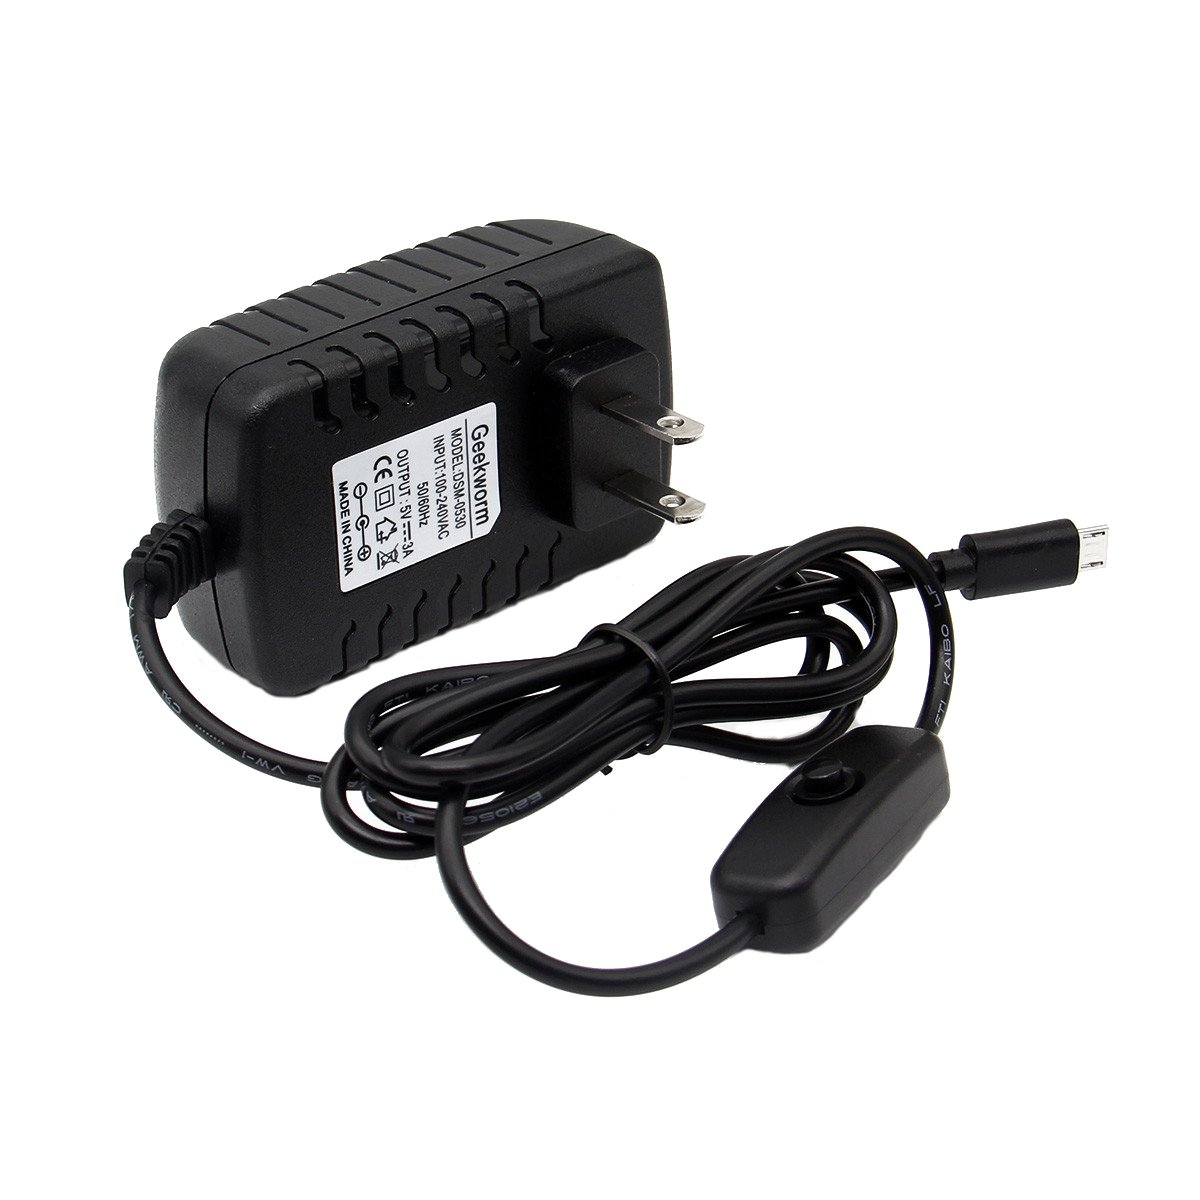 Geekworm US Standard DC 5V 3.0A Power Supply Adapter with Switch For Raspberry Pi 1